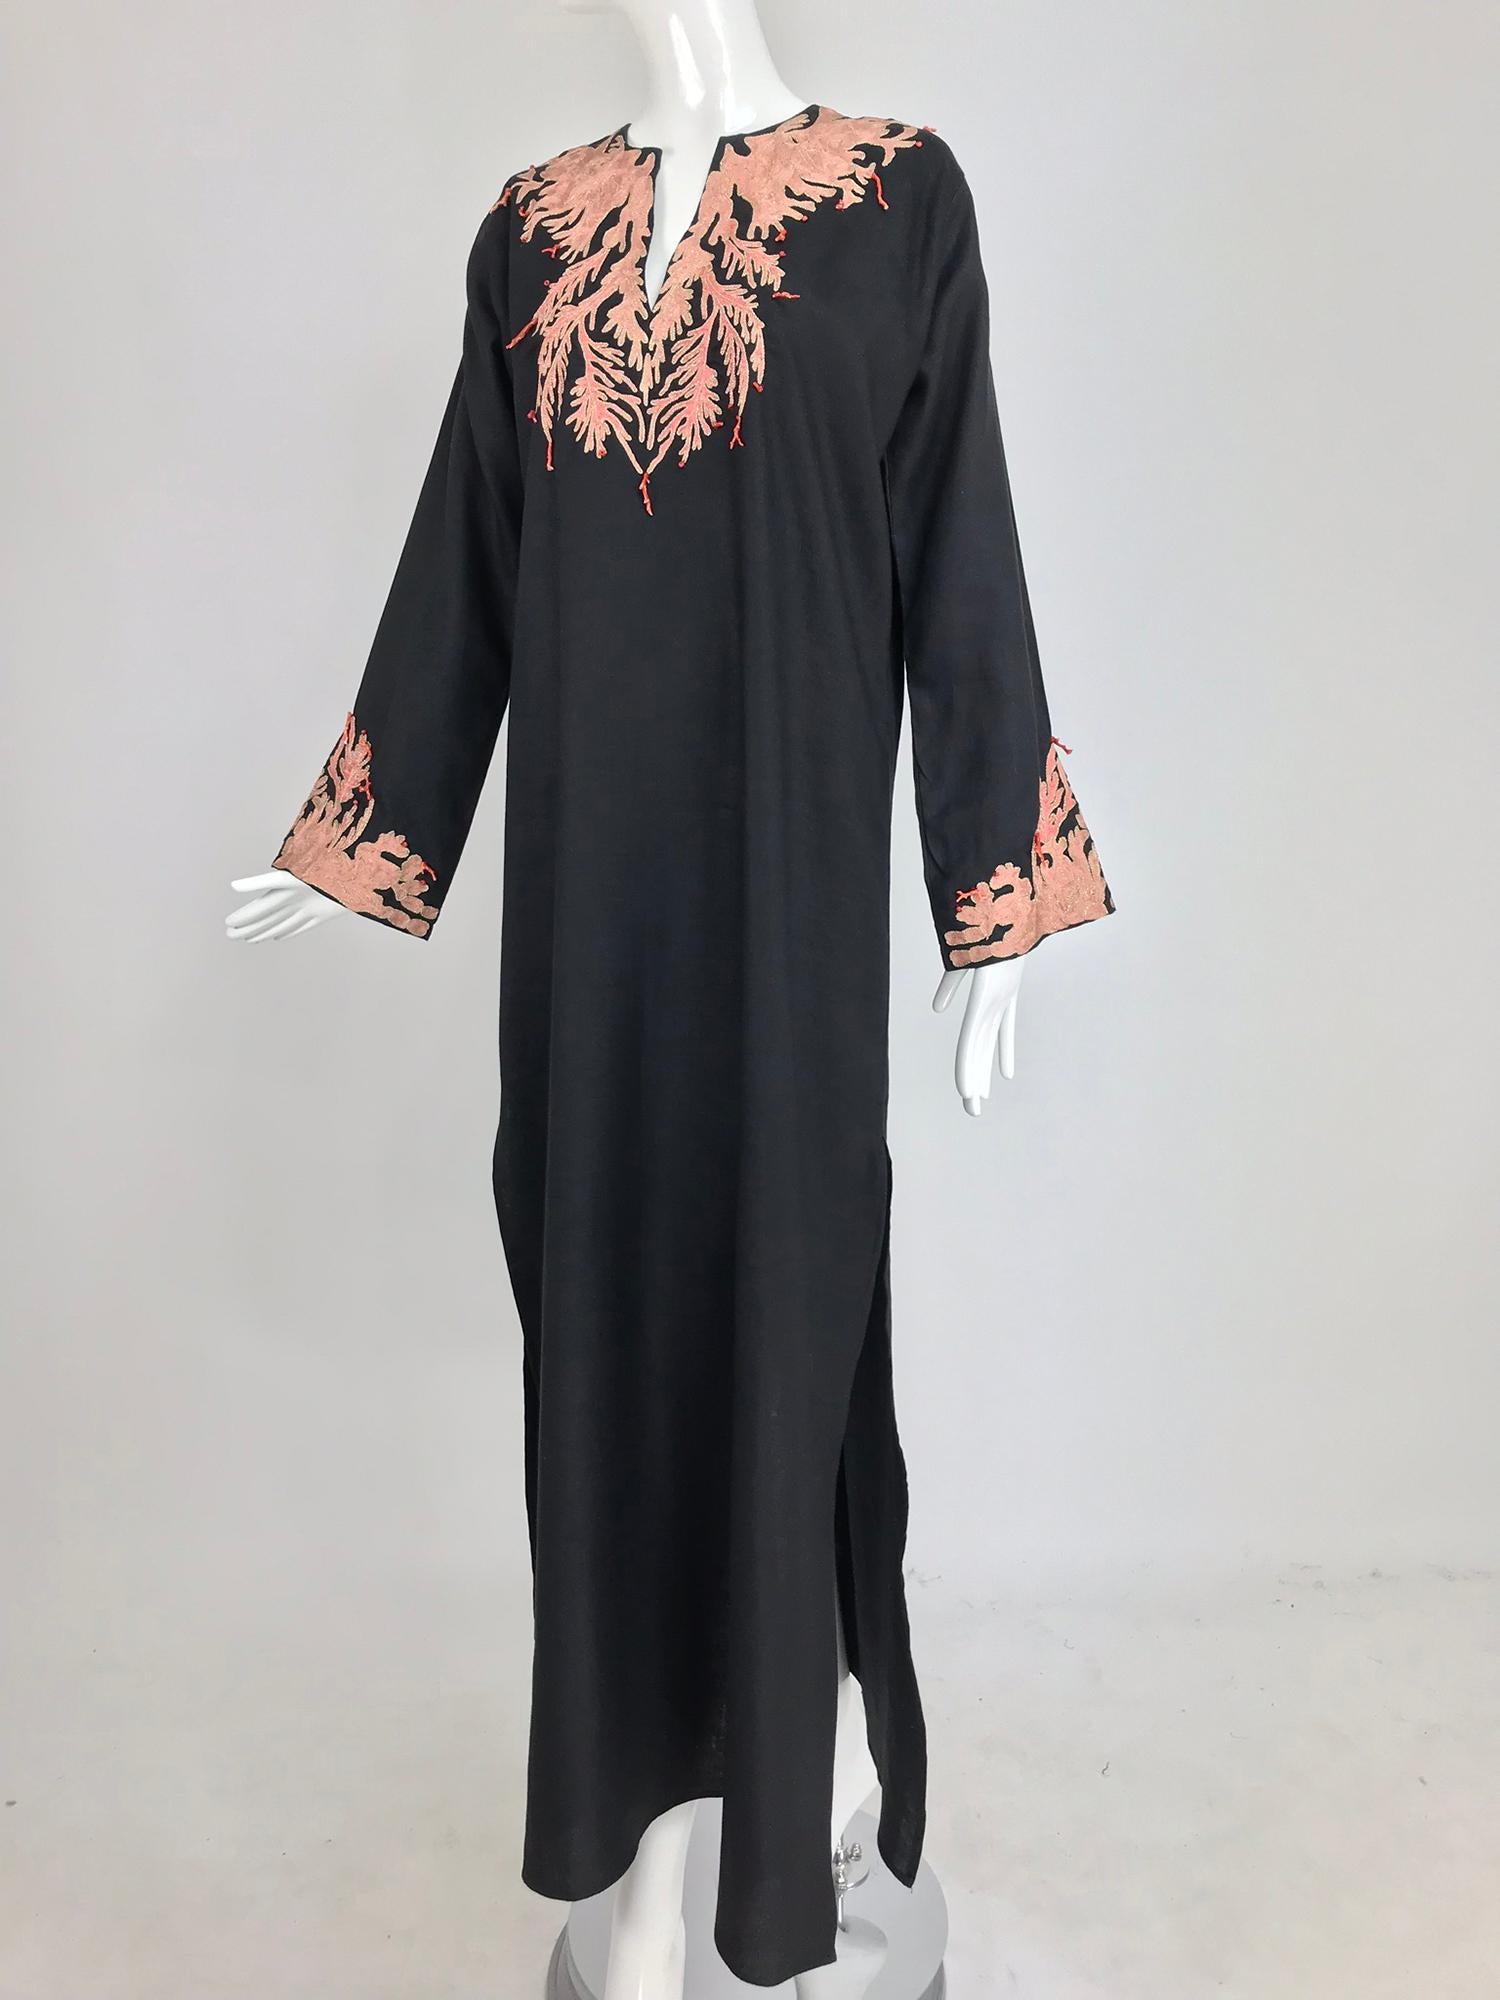 Jeannie McQueeny coral embroidered black linen caftan  7